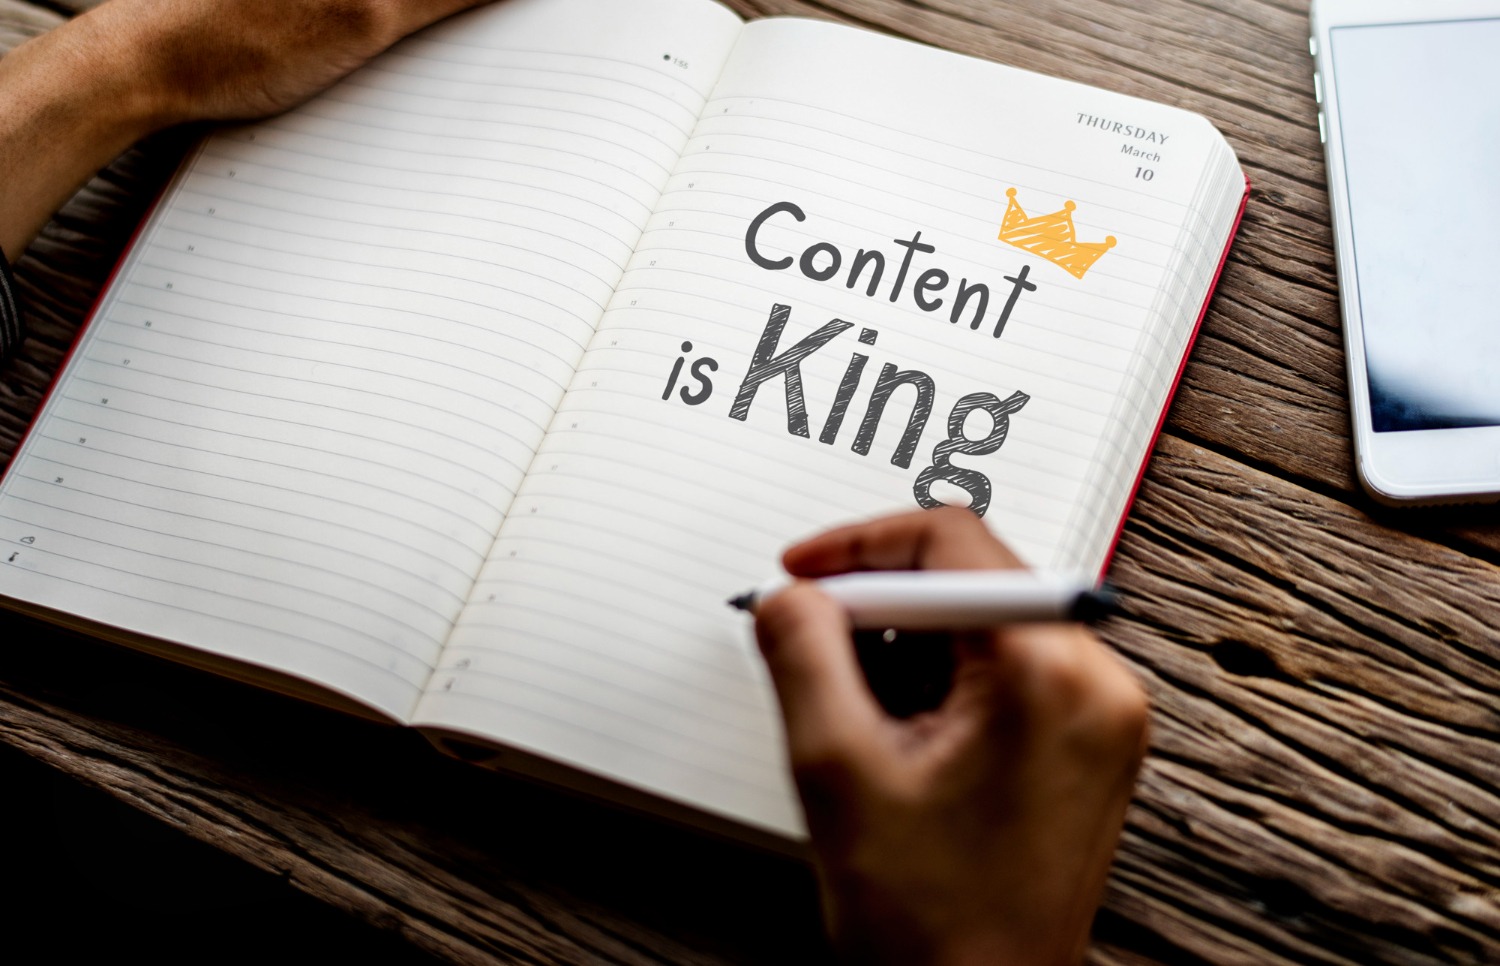 A note with someone's hand holding it while they write the words "Content Is King" in black while making an illustration of a crown on top of it.